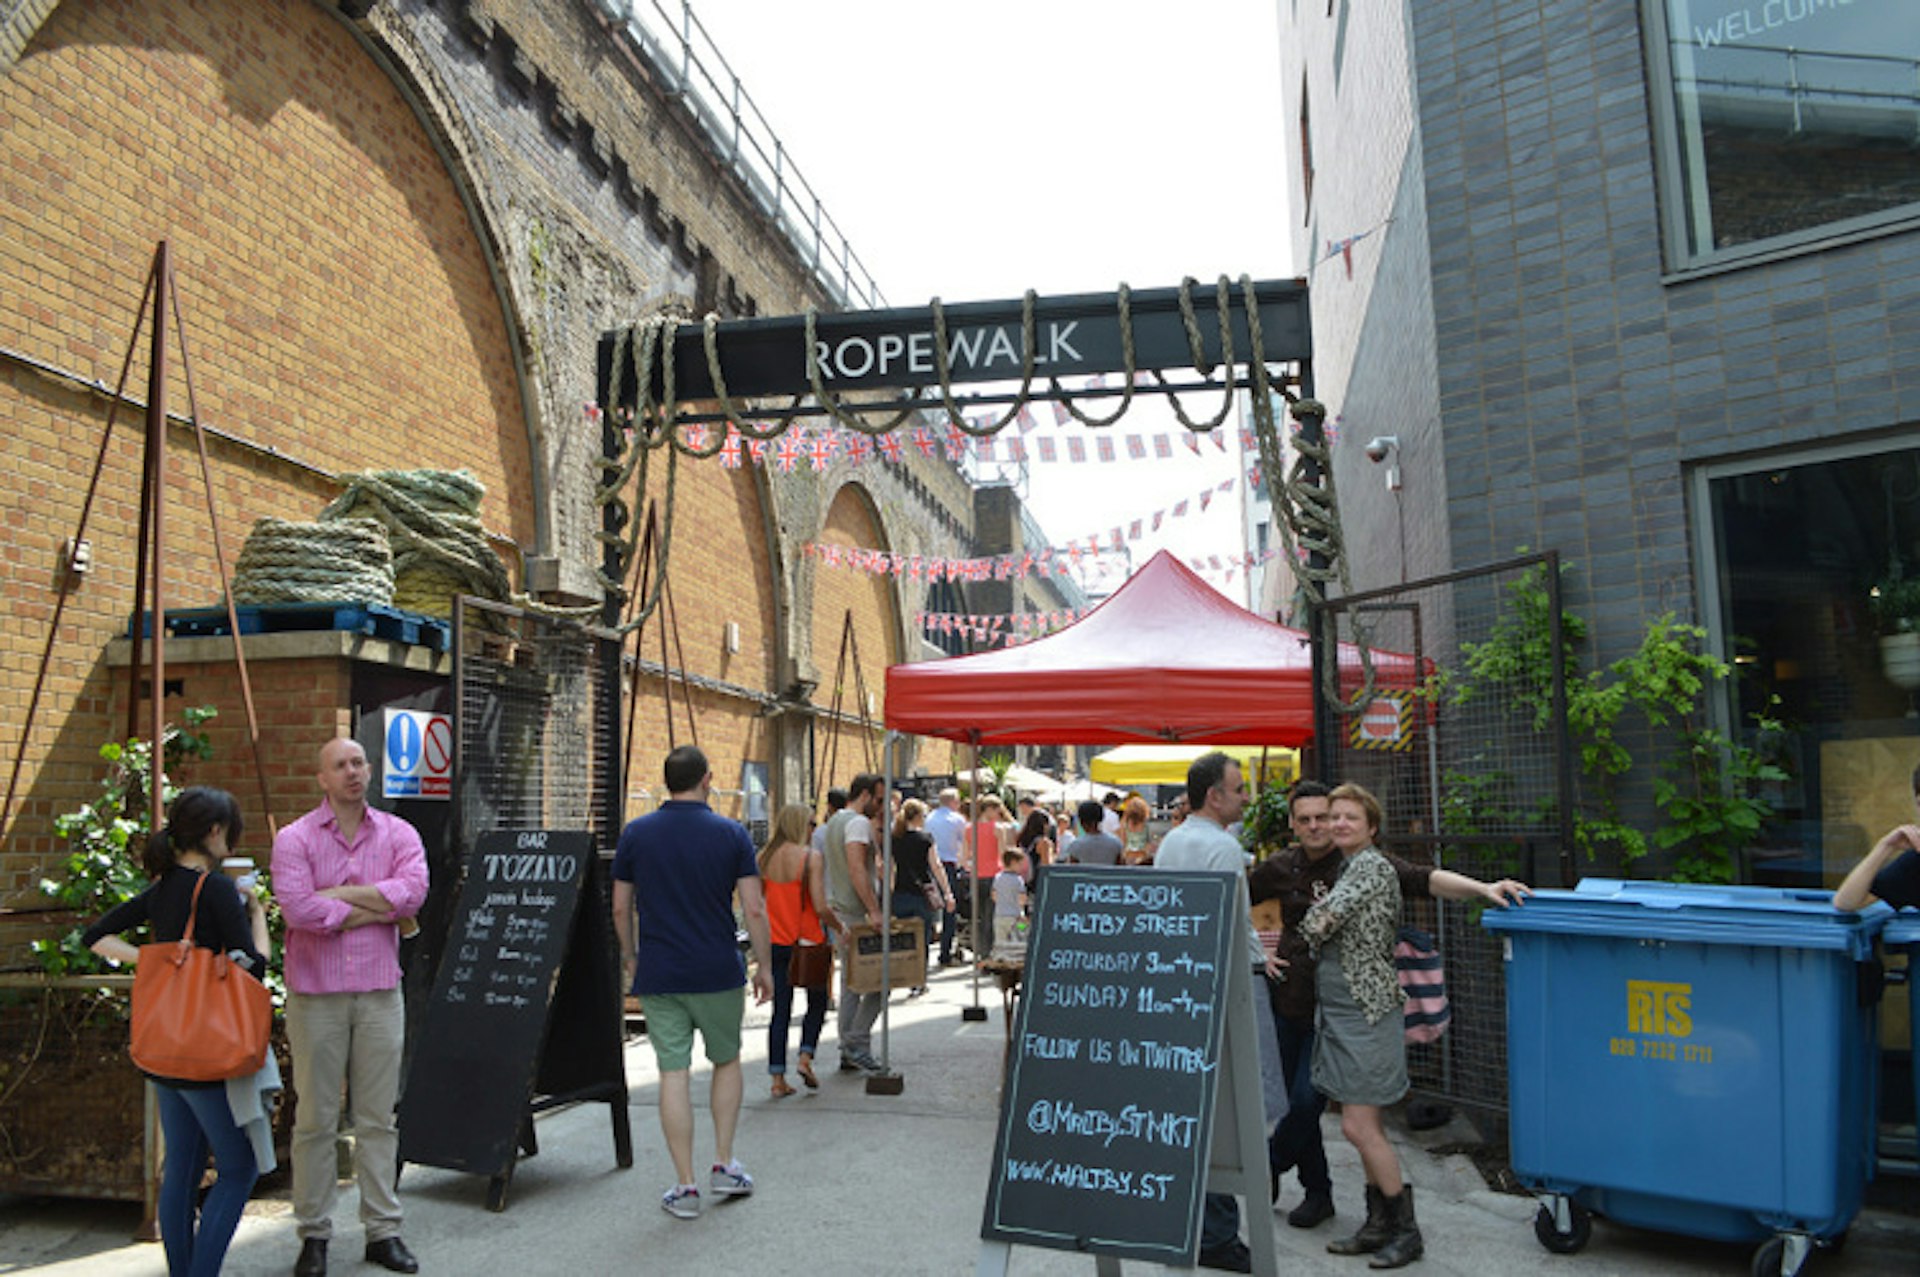 Maltby Street Market. Image by Matt Brown / CC BY 2.0